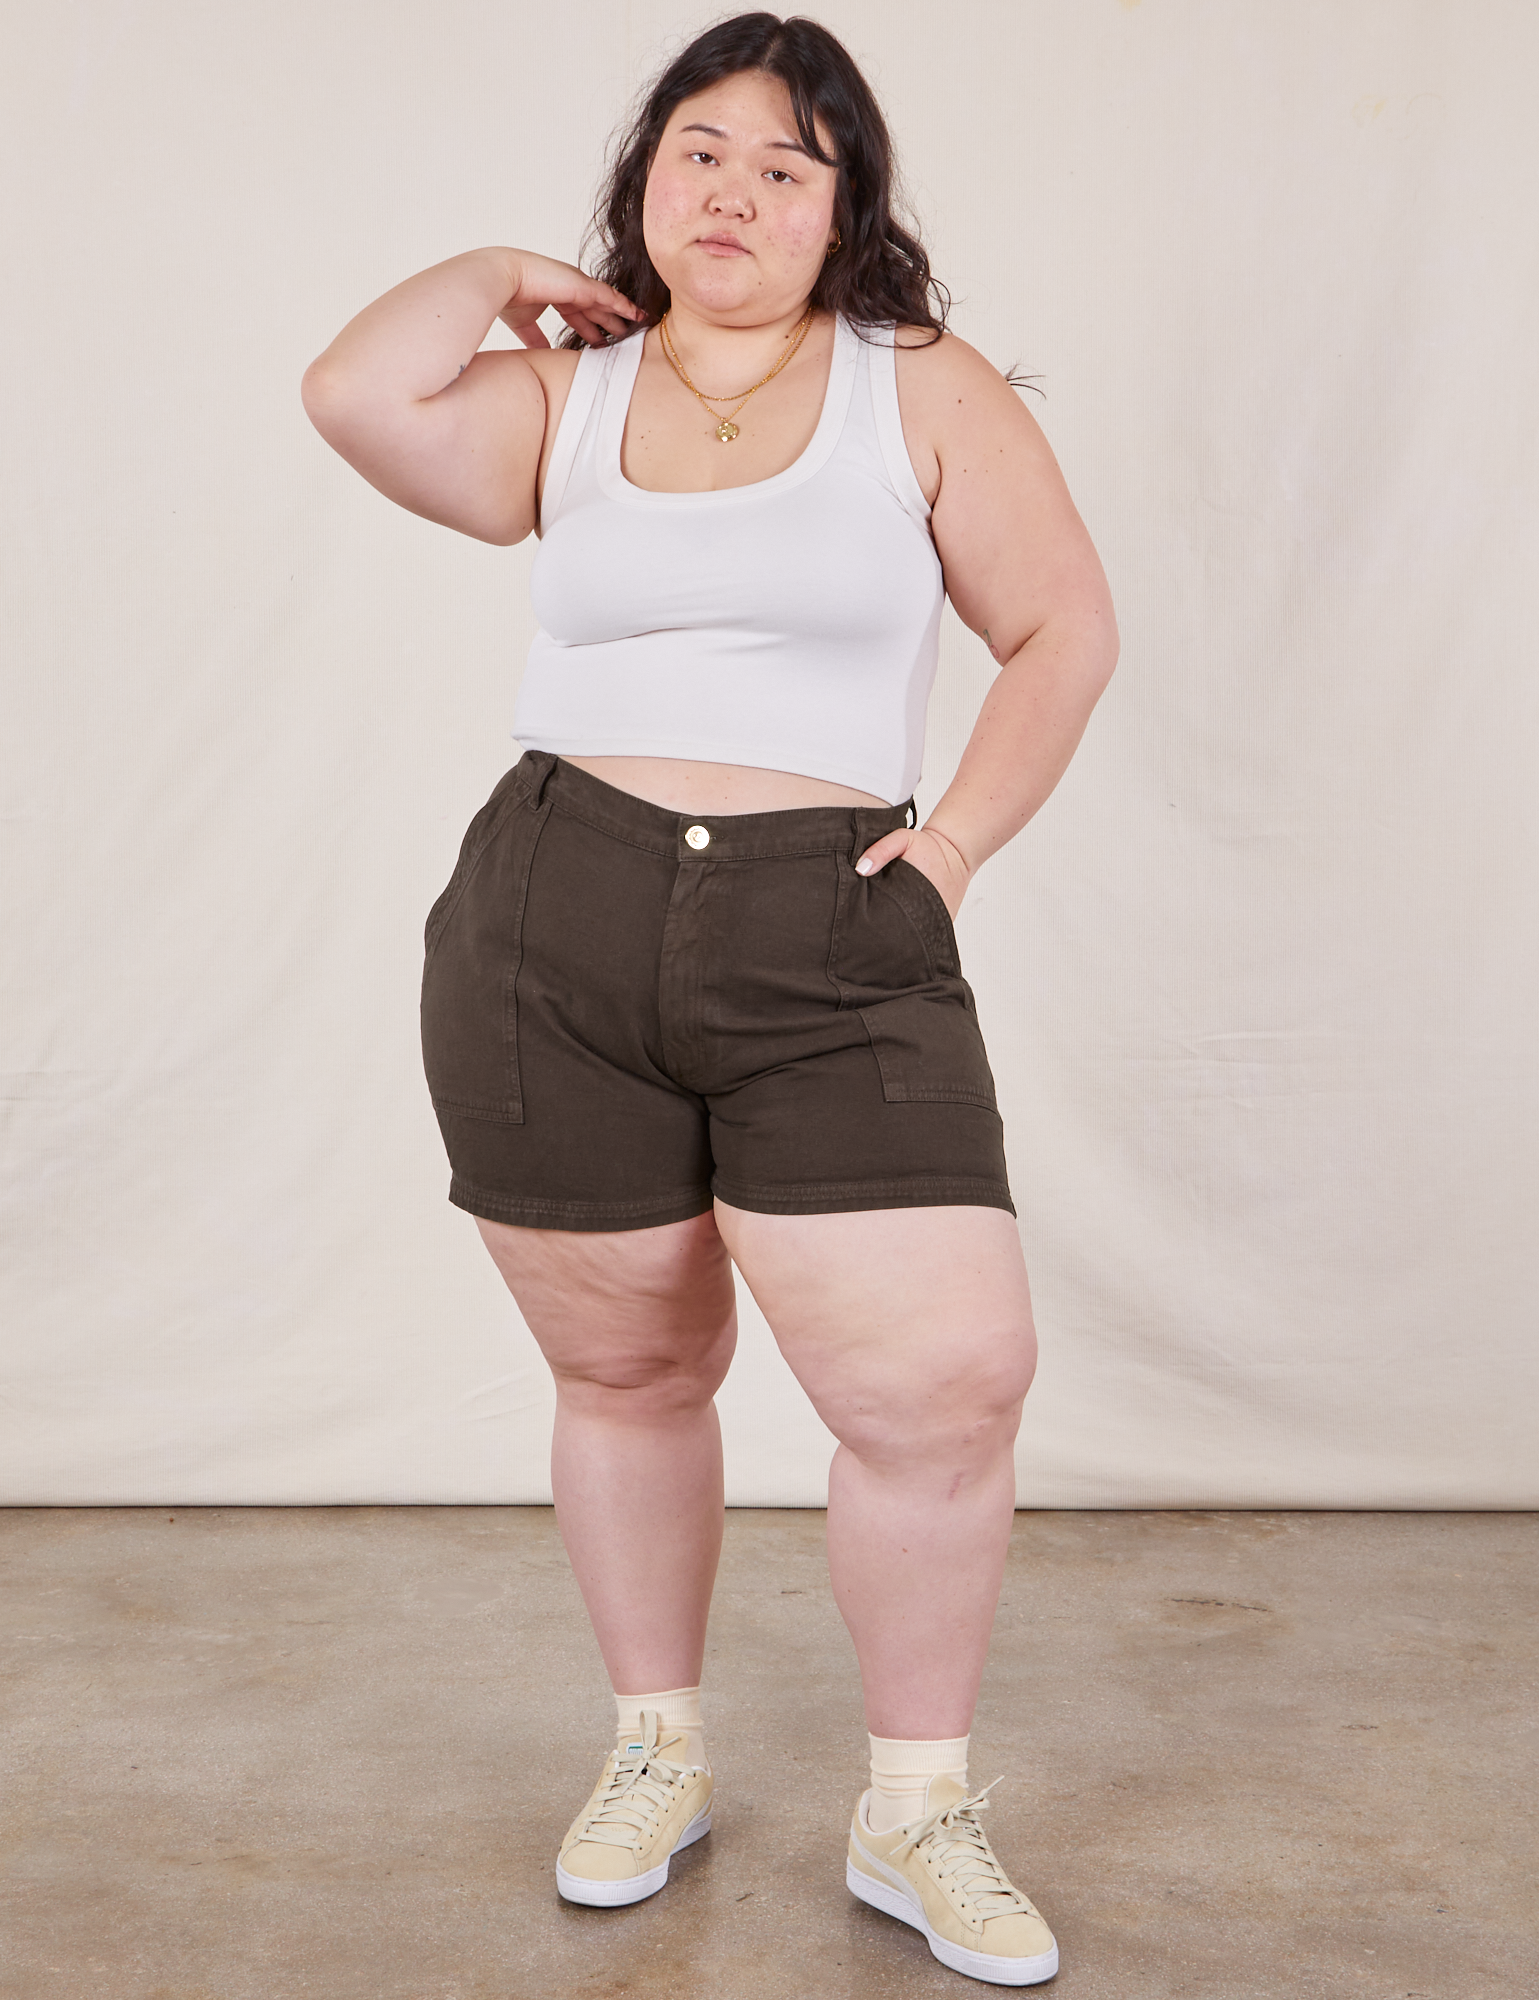 Ashley is 5’7” and wearing 1XL Classic Work Shorts in Espresso Brown paired with Cropped Tank Top in vintage tee off-white